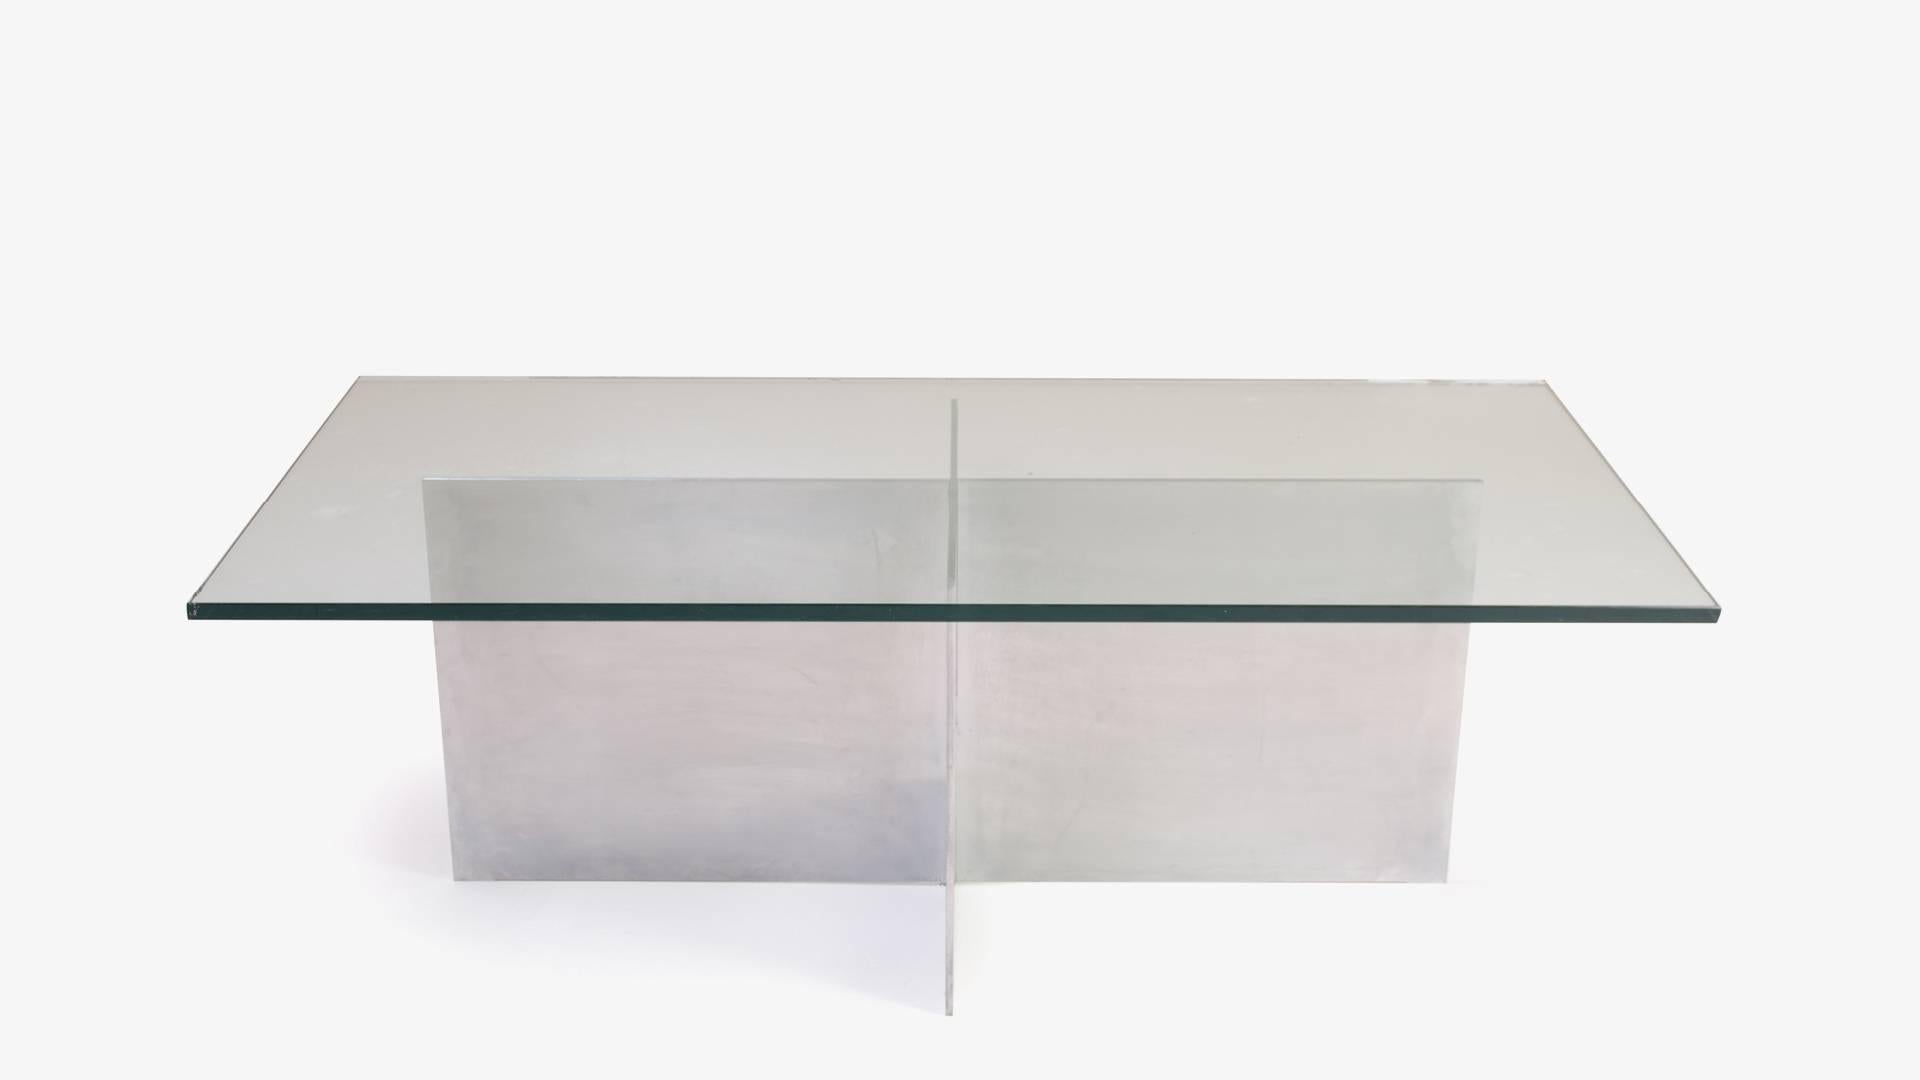 An elegant Minimalist design entirely from 3 planes of material; 2 of metal and the third of glass. Two metal planes cross together to form the base of this elegant table, subtle in profile but bold in materiality. Original Knoll glass is used to